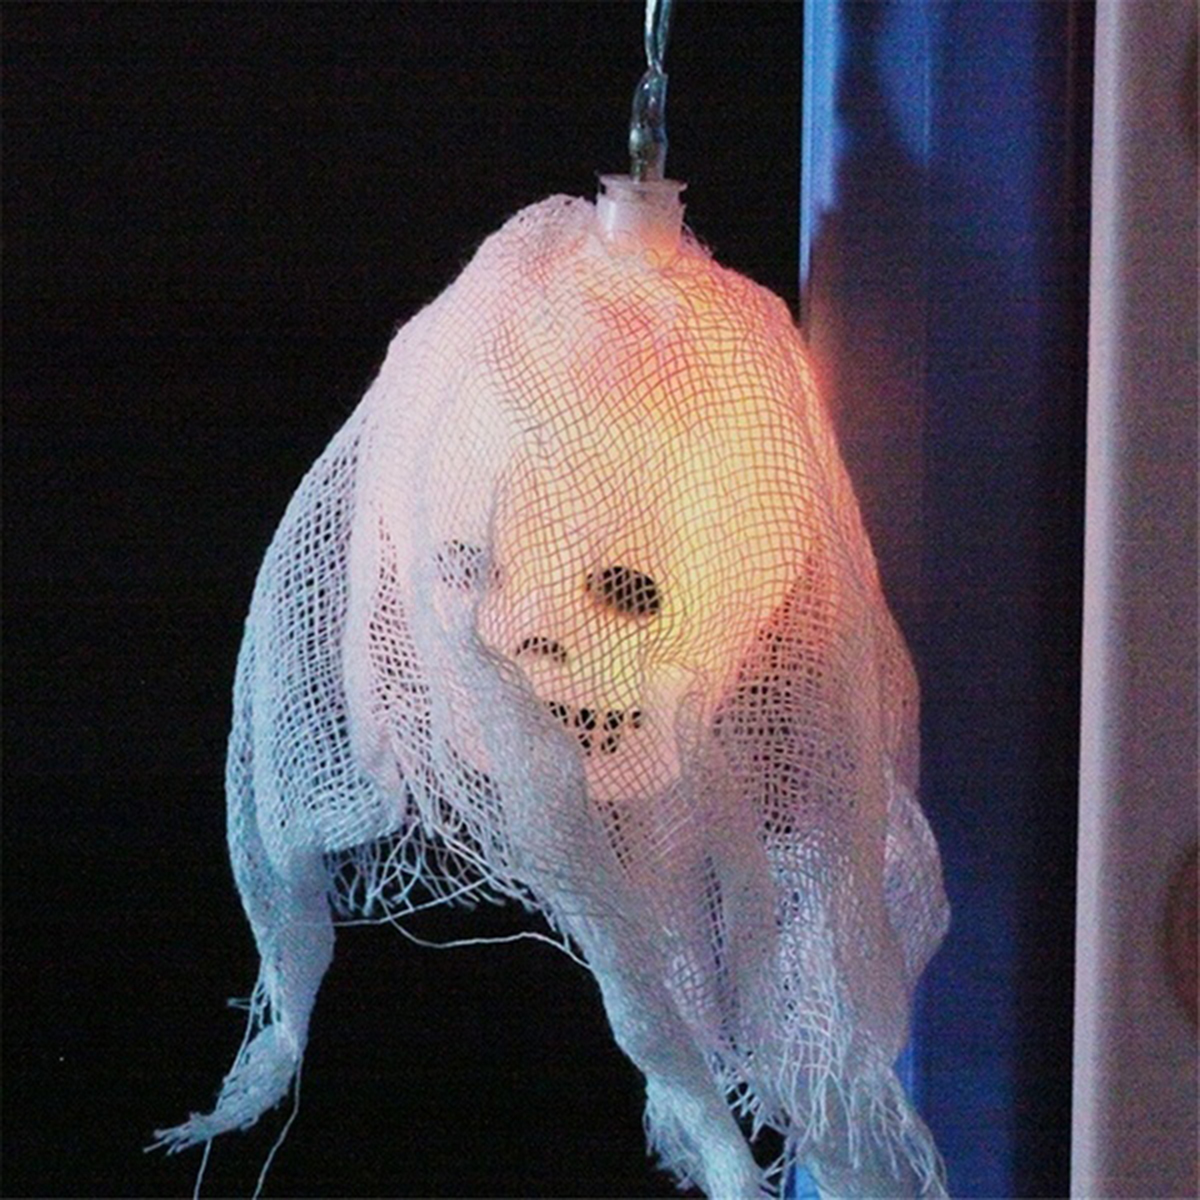 25M-Battery-Powered-10-LED-Skull-String-Light-Decoration-Lamp-for-Halloween-Ghost-Party-Decor-1549748-6